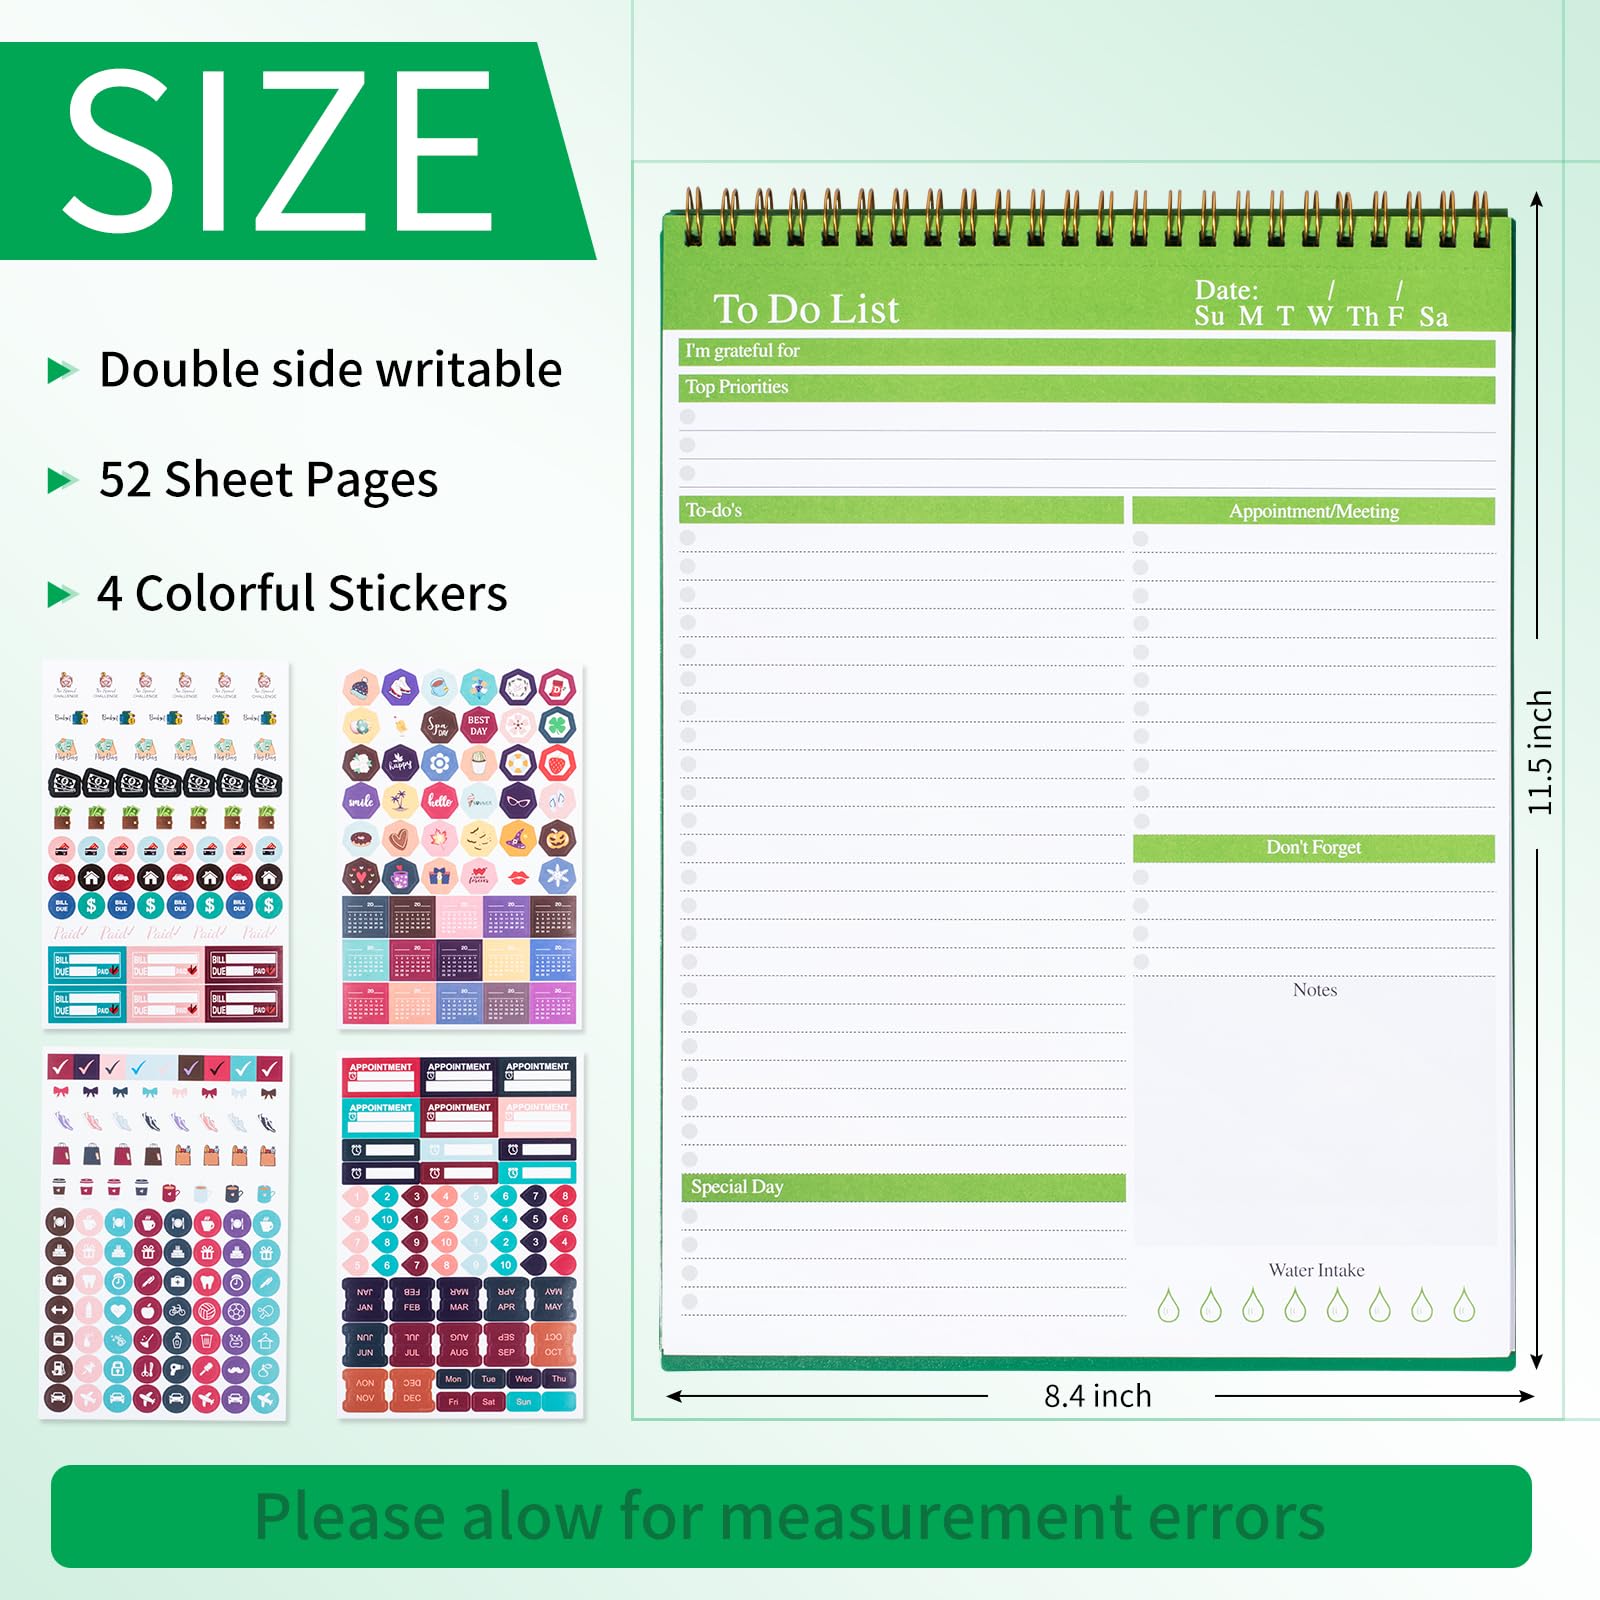 Smliekate To Do List Notepad, Undated To Do List Notebook, 52 Sheets (11.5" x 8.4") Spiral Bound Tear Off Daily Planner Student Planner and Work Planner - Green